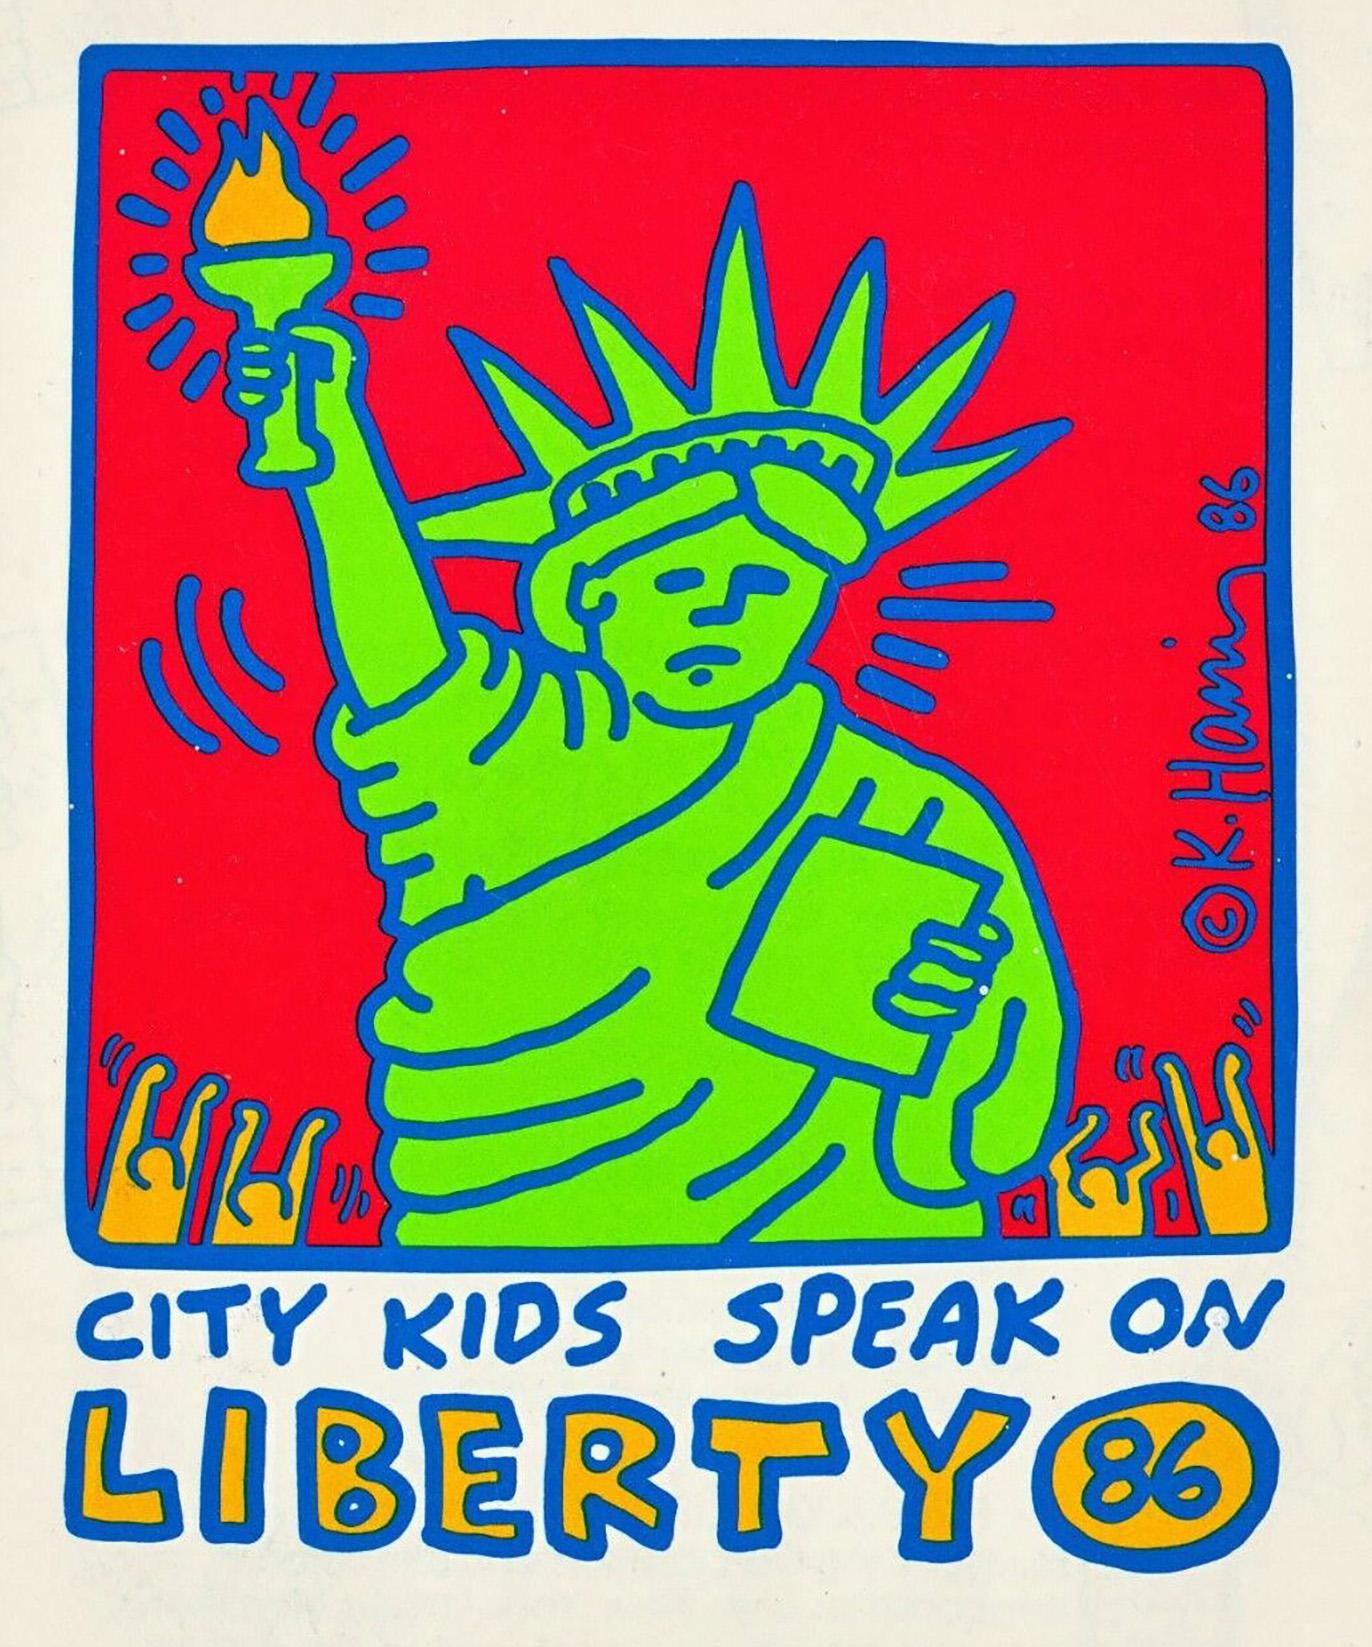 Keith Haring for New York CityKids, 1986.
Rare vintage 1986 sticker illustrated by Keith Haring for the CityKids coalition in New York:
"City Kids Speak on Liberty" New York, 1986 sponsored by Burger King.

Offset printed sticker featuring a Classic